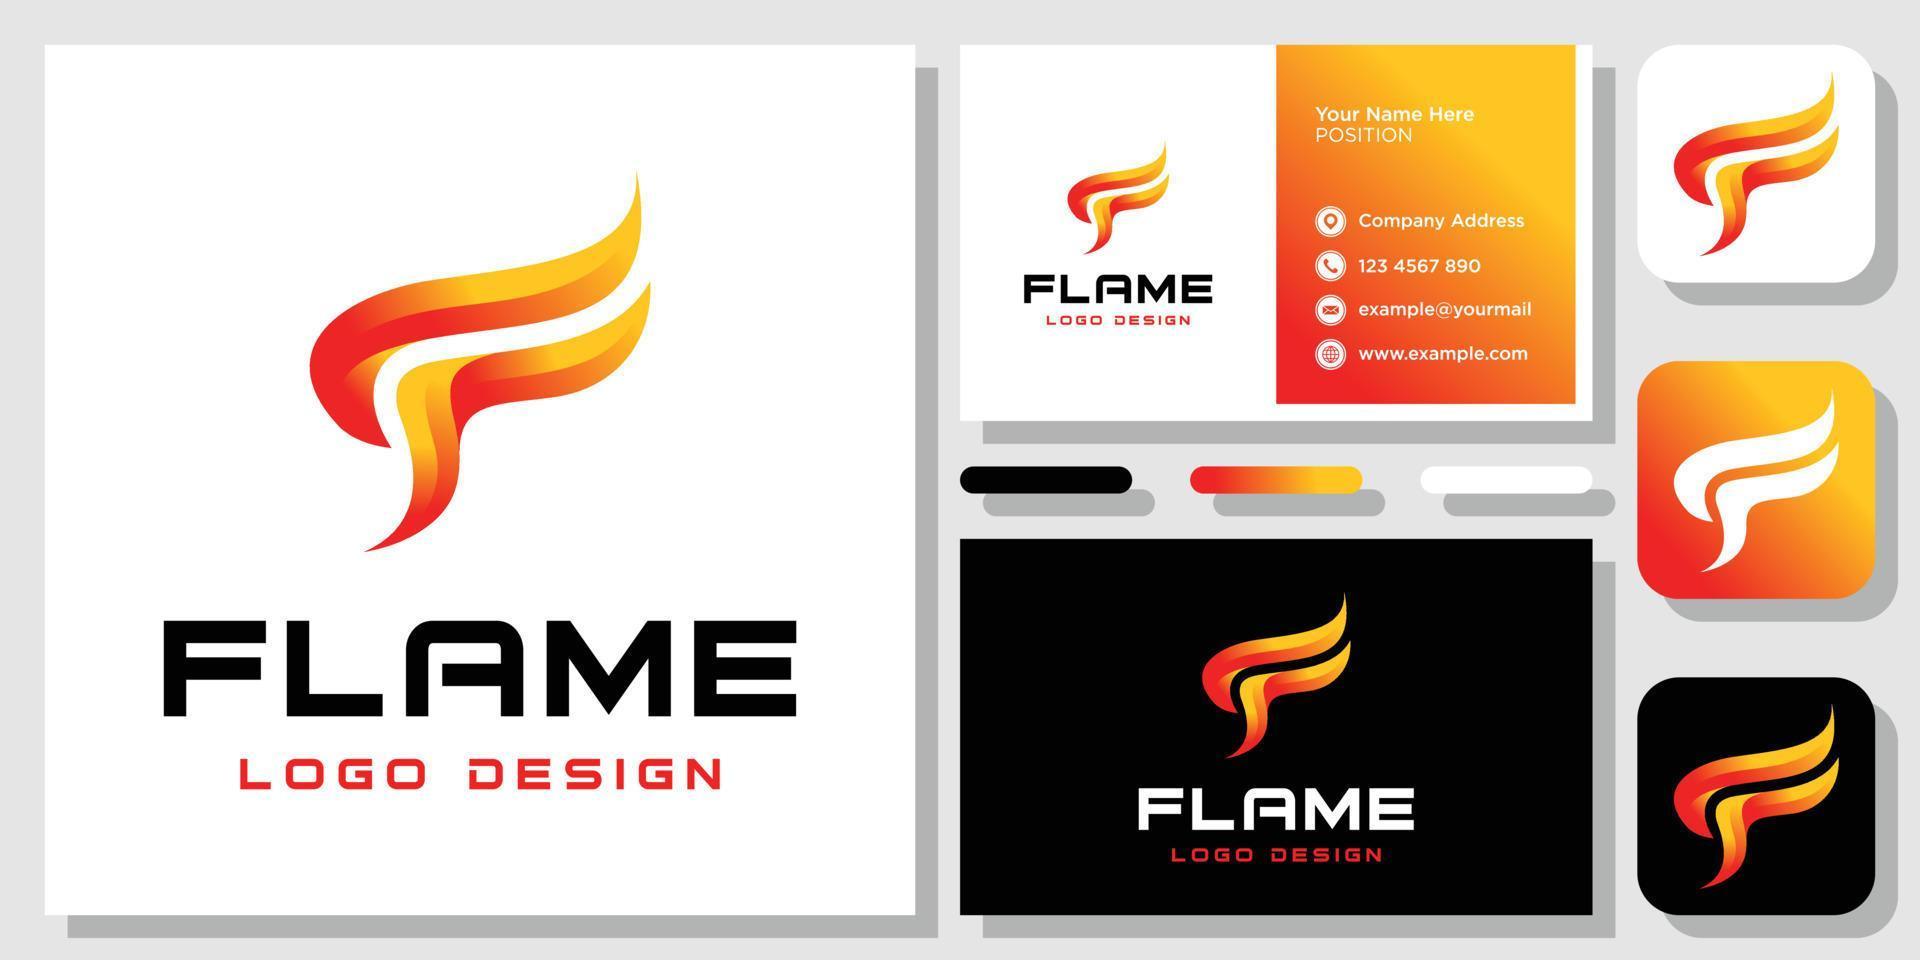 Initial Letter F Flame Fire Energy Red Burn Torch logo design inspiration with Layout Template Business Card vector